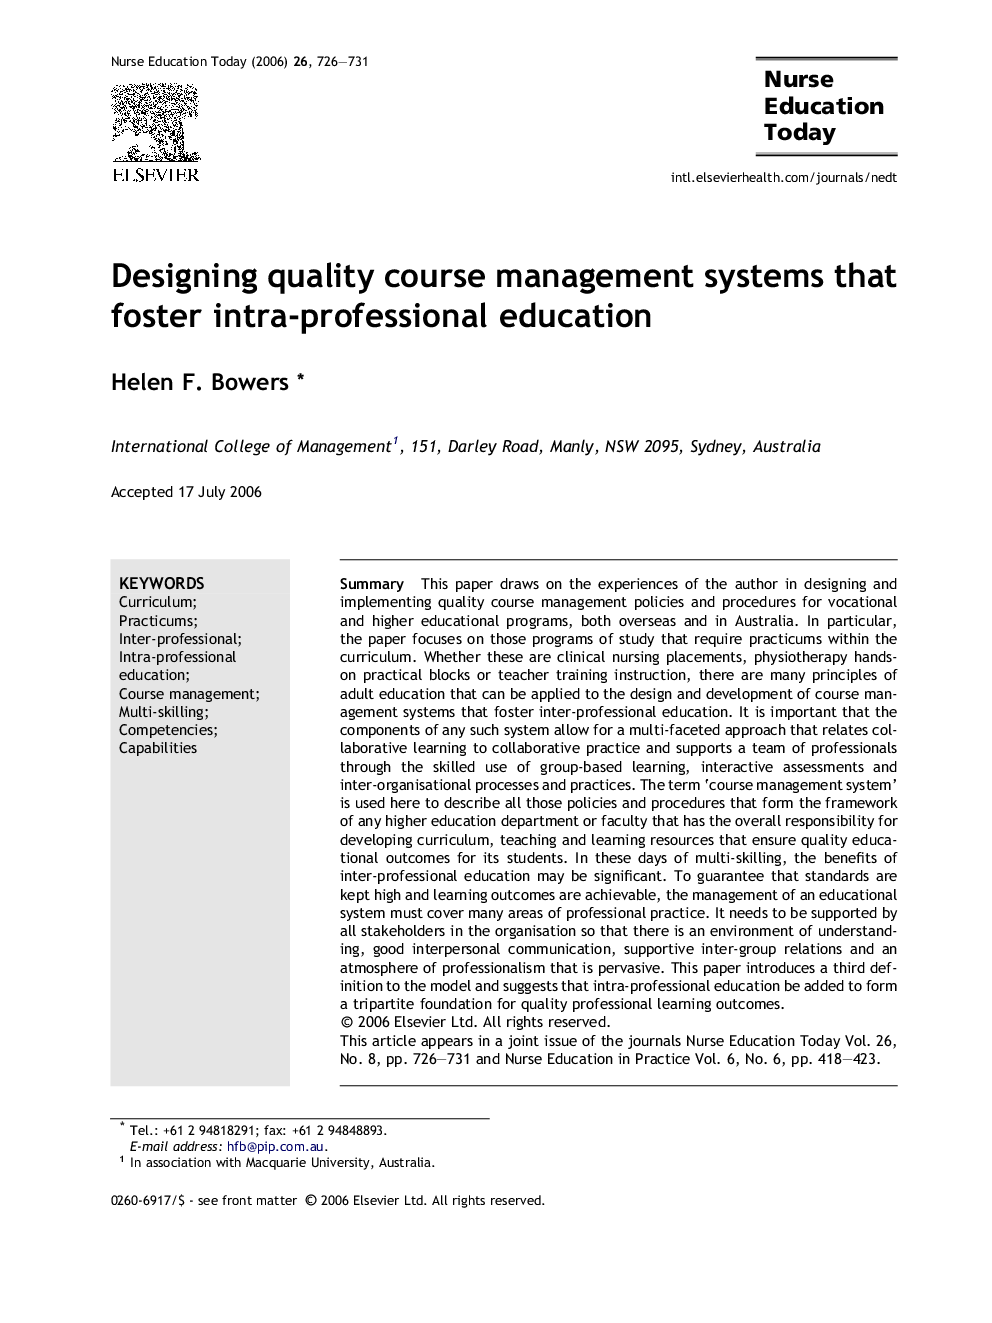 Designing quality course management systems that foster intra-professional education